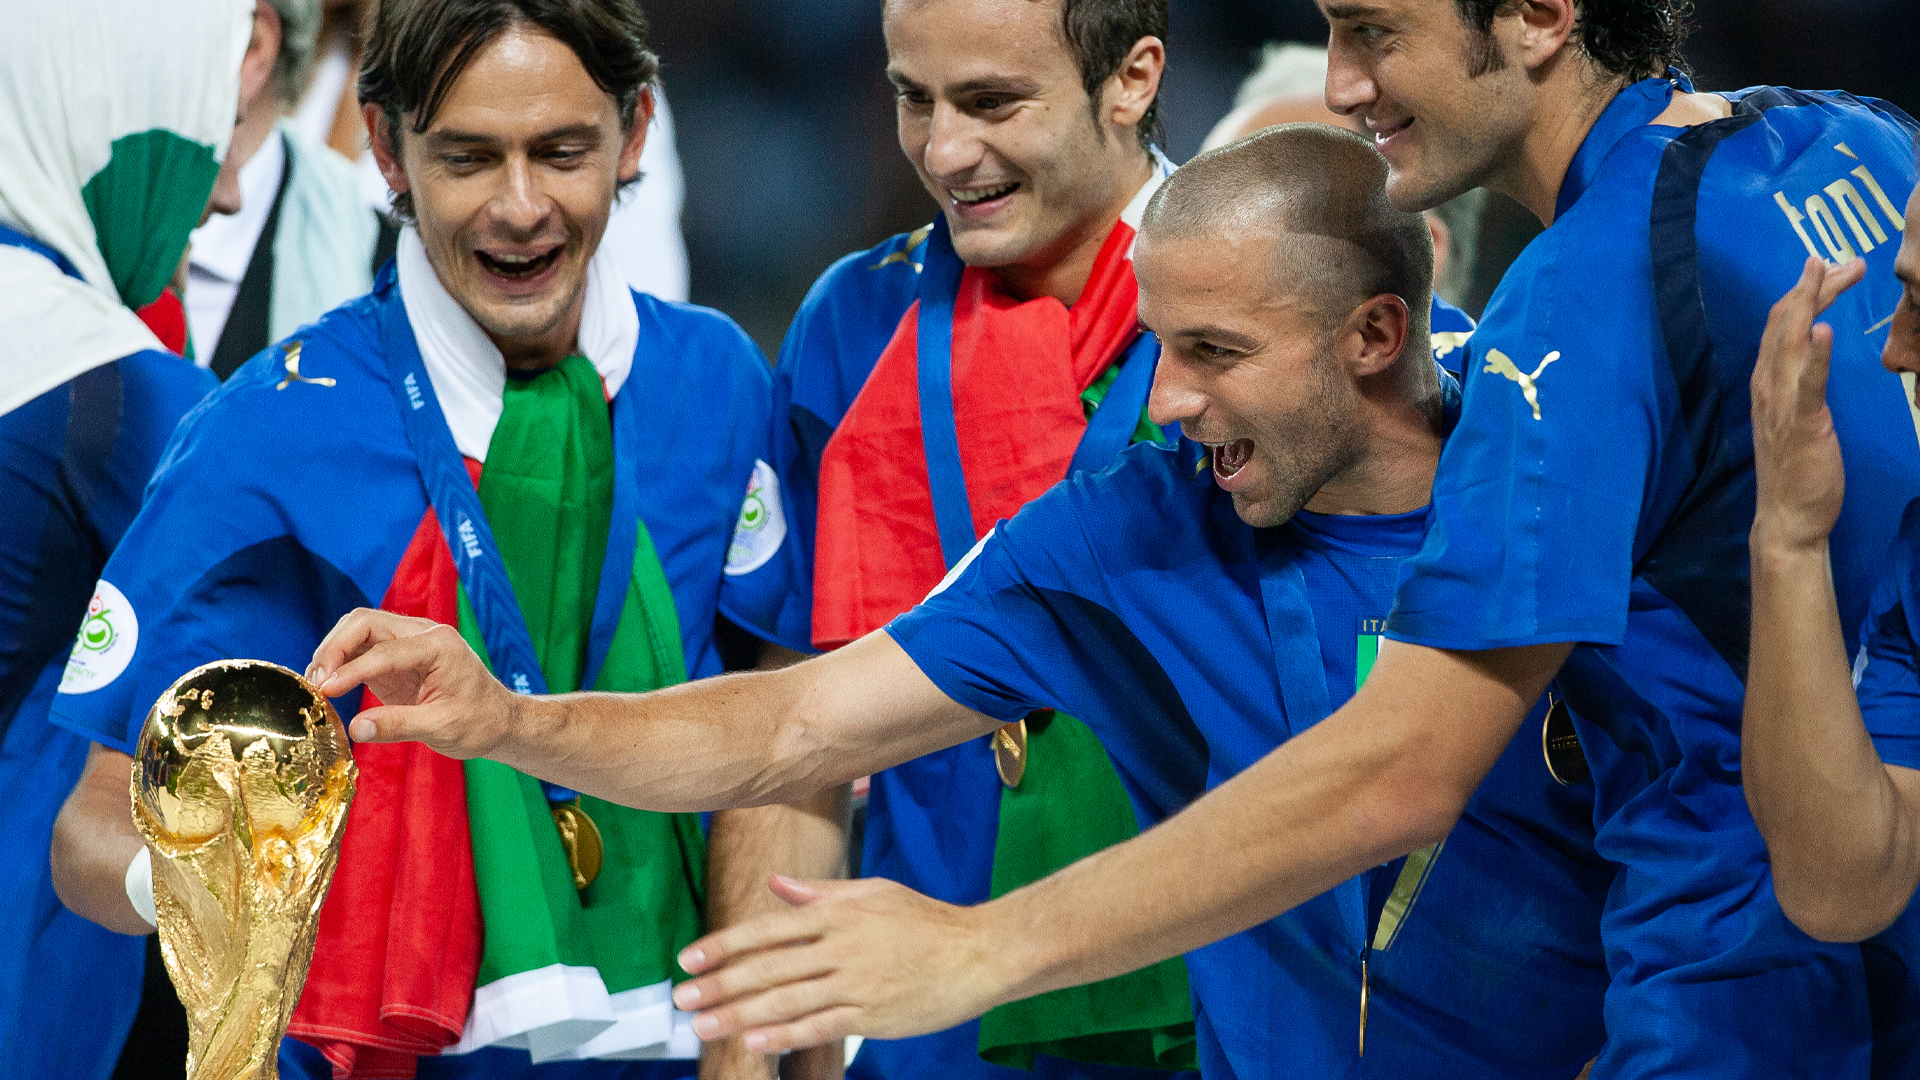 Very Strange: Serie A Referee Kits Feature Old Italy 2006 World